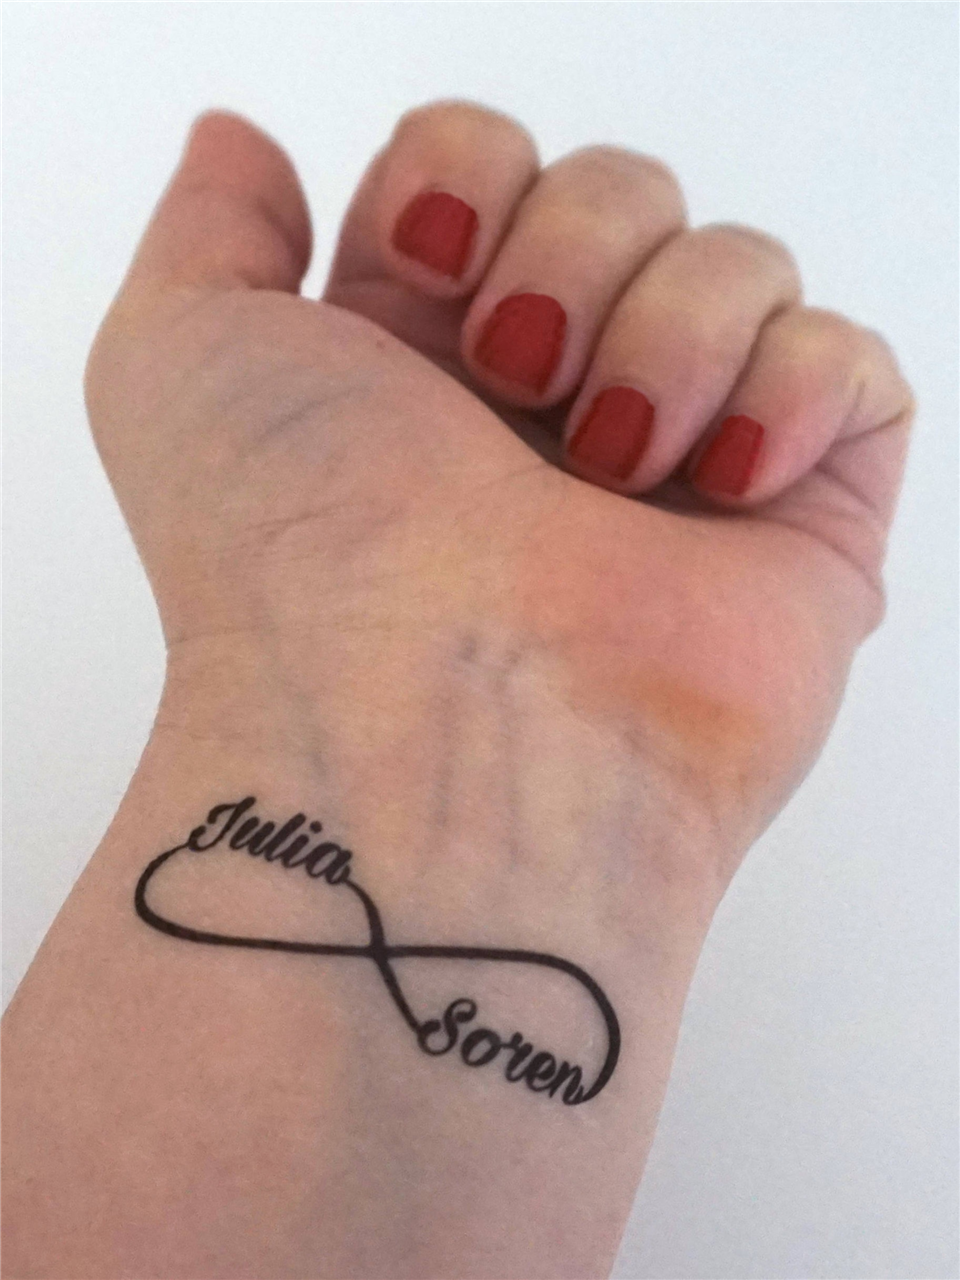 25 Coolest Couple Tattoos We Found on the Internet for Your Tat Inspiration